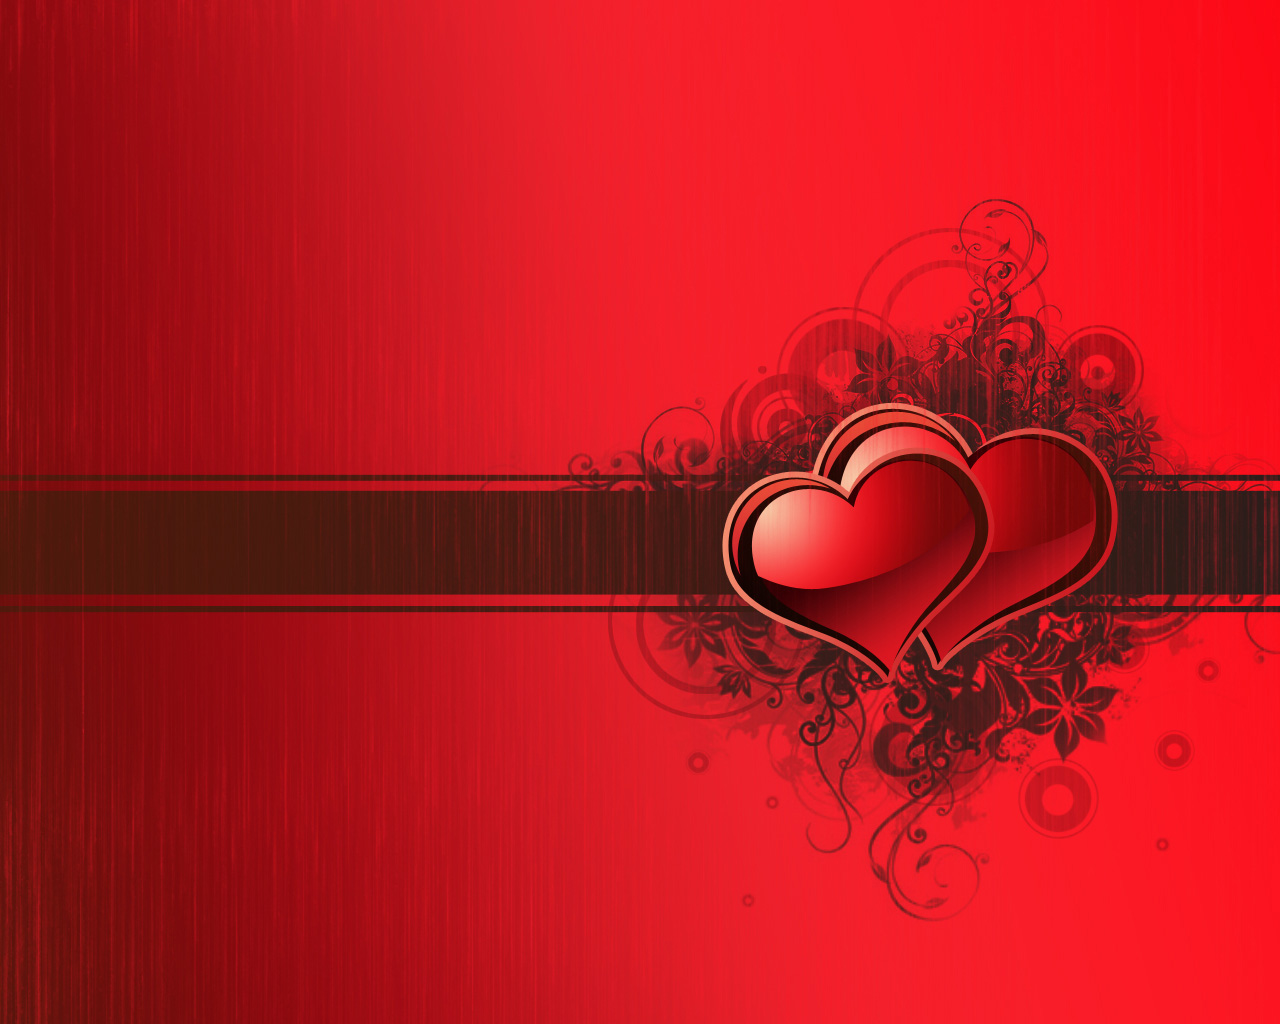 Valentines Day Wallpapers and Backgrounds